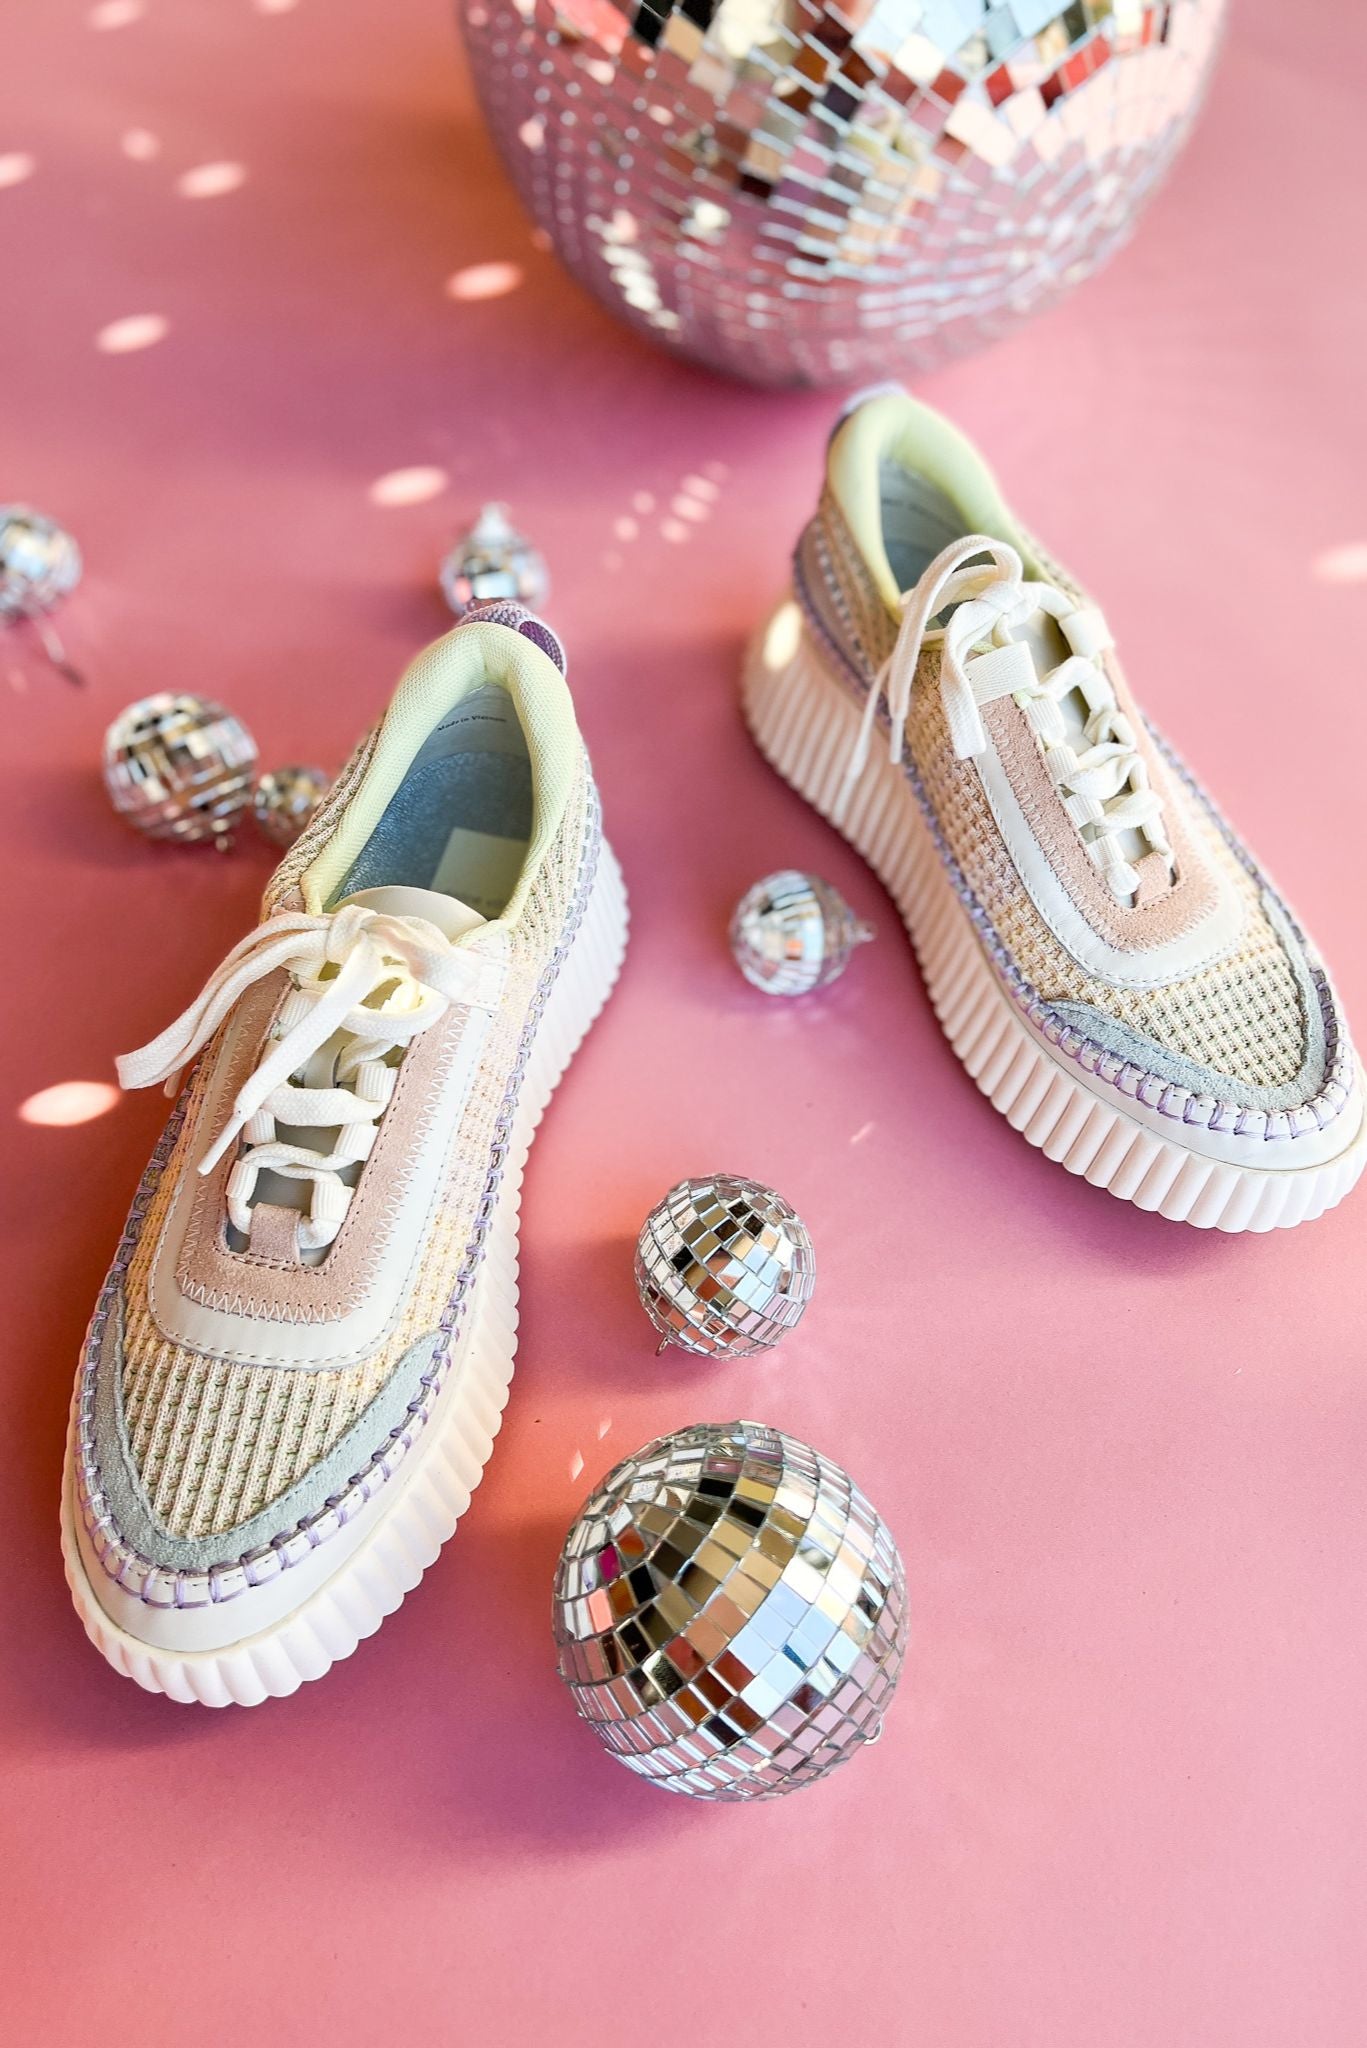 Load image into Gallery viewer, Dolce Vita Pastel Knit Platform Sneakers. Spring chic. mom style. work to weekend. beach perfection. Shop Style Your Senses by Mallory Fitzsimmons.
